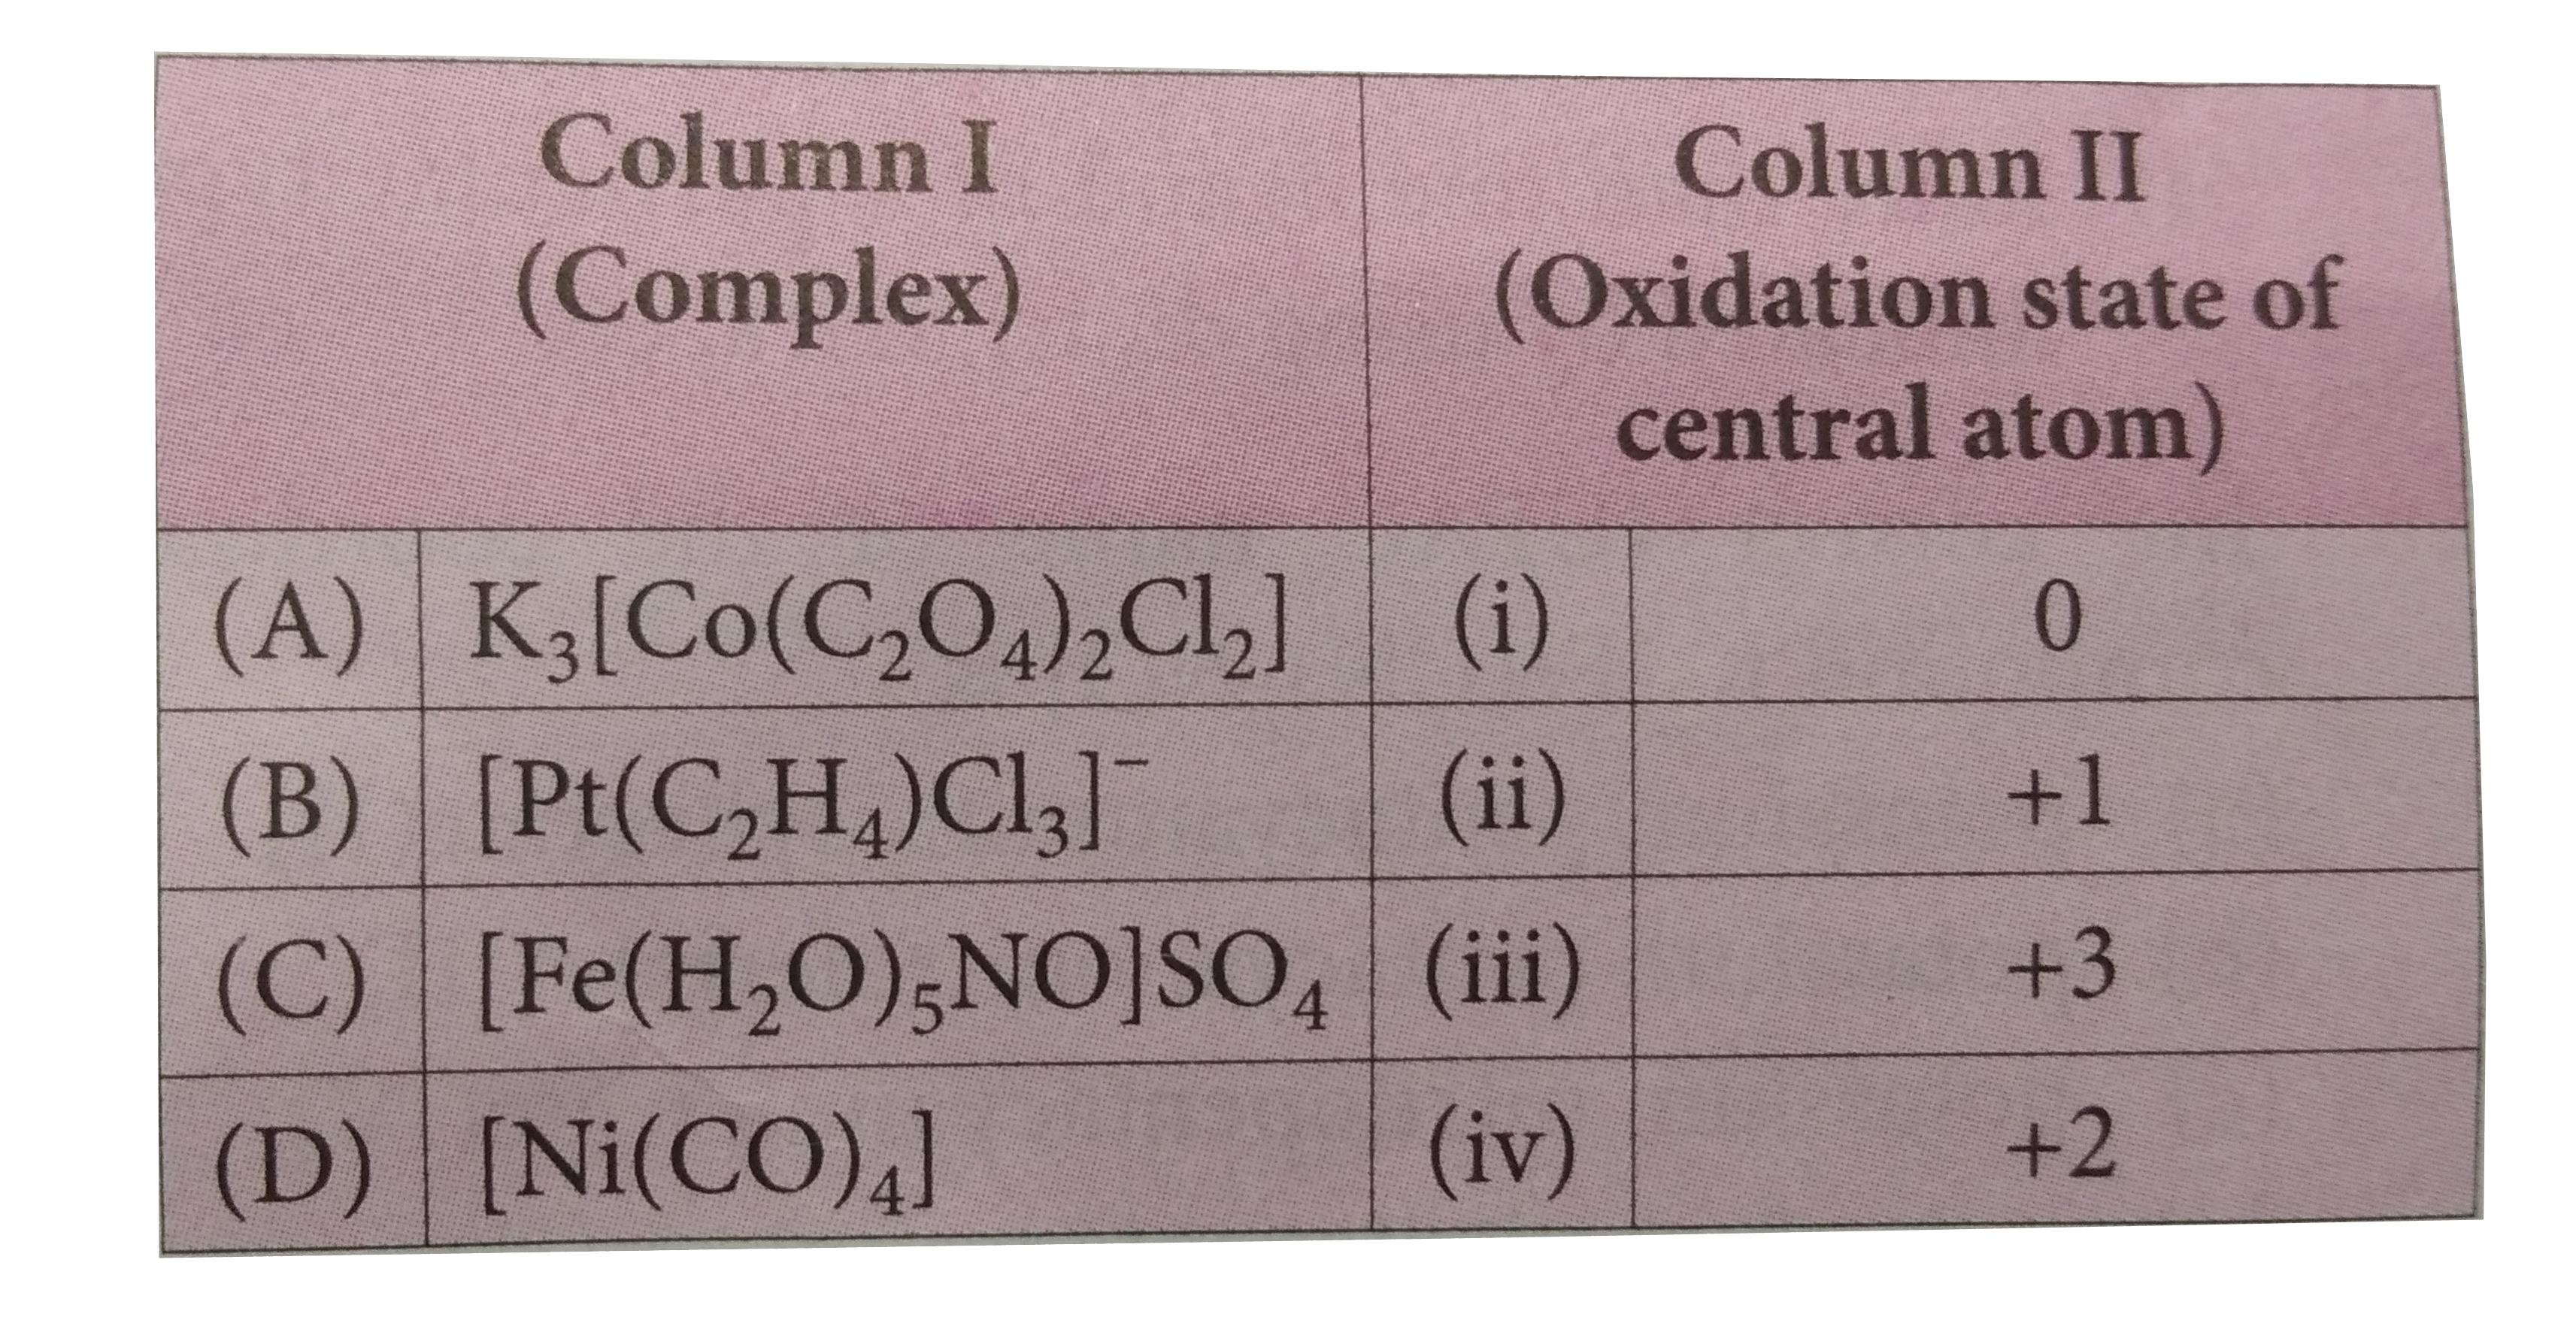 Match the complexes given in column I with the oxidation states of central metal atoms given in column II and mark the appropriate choice .